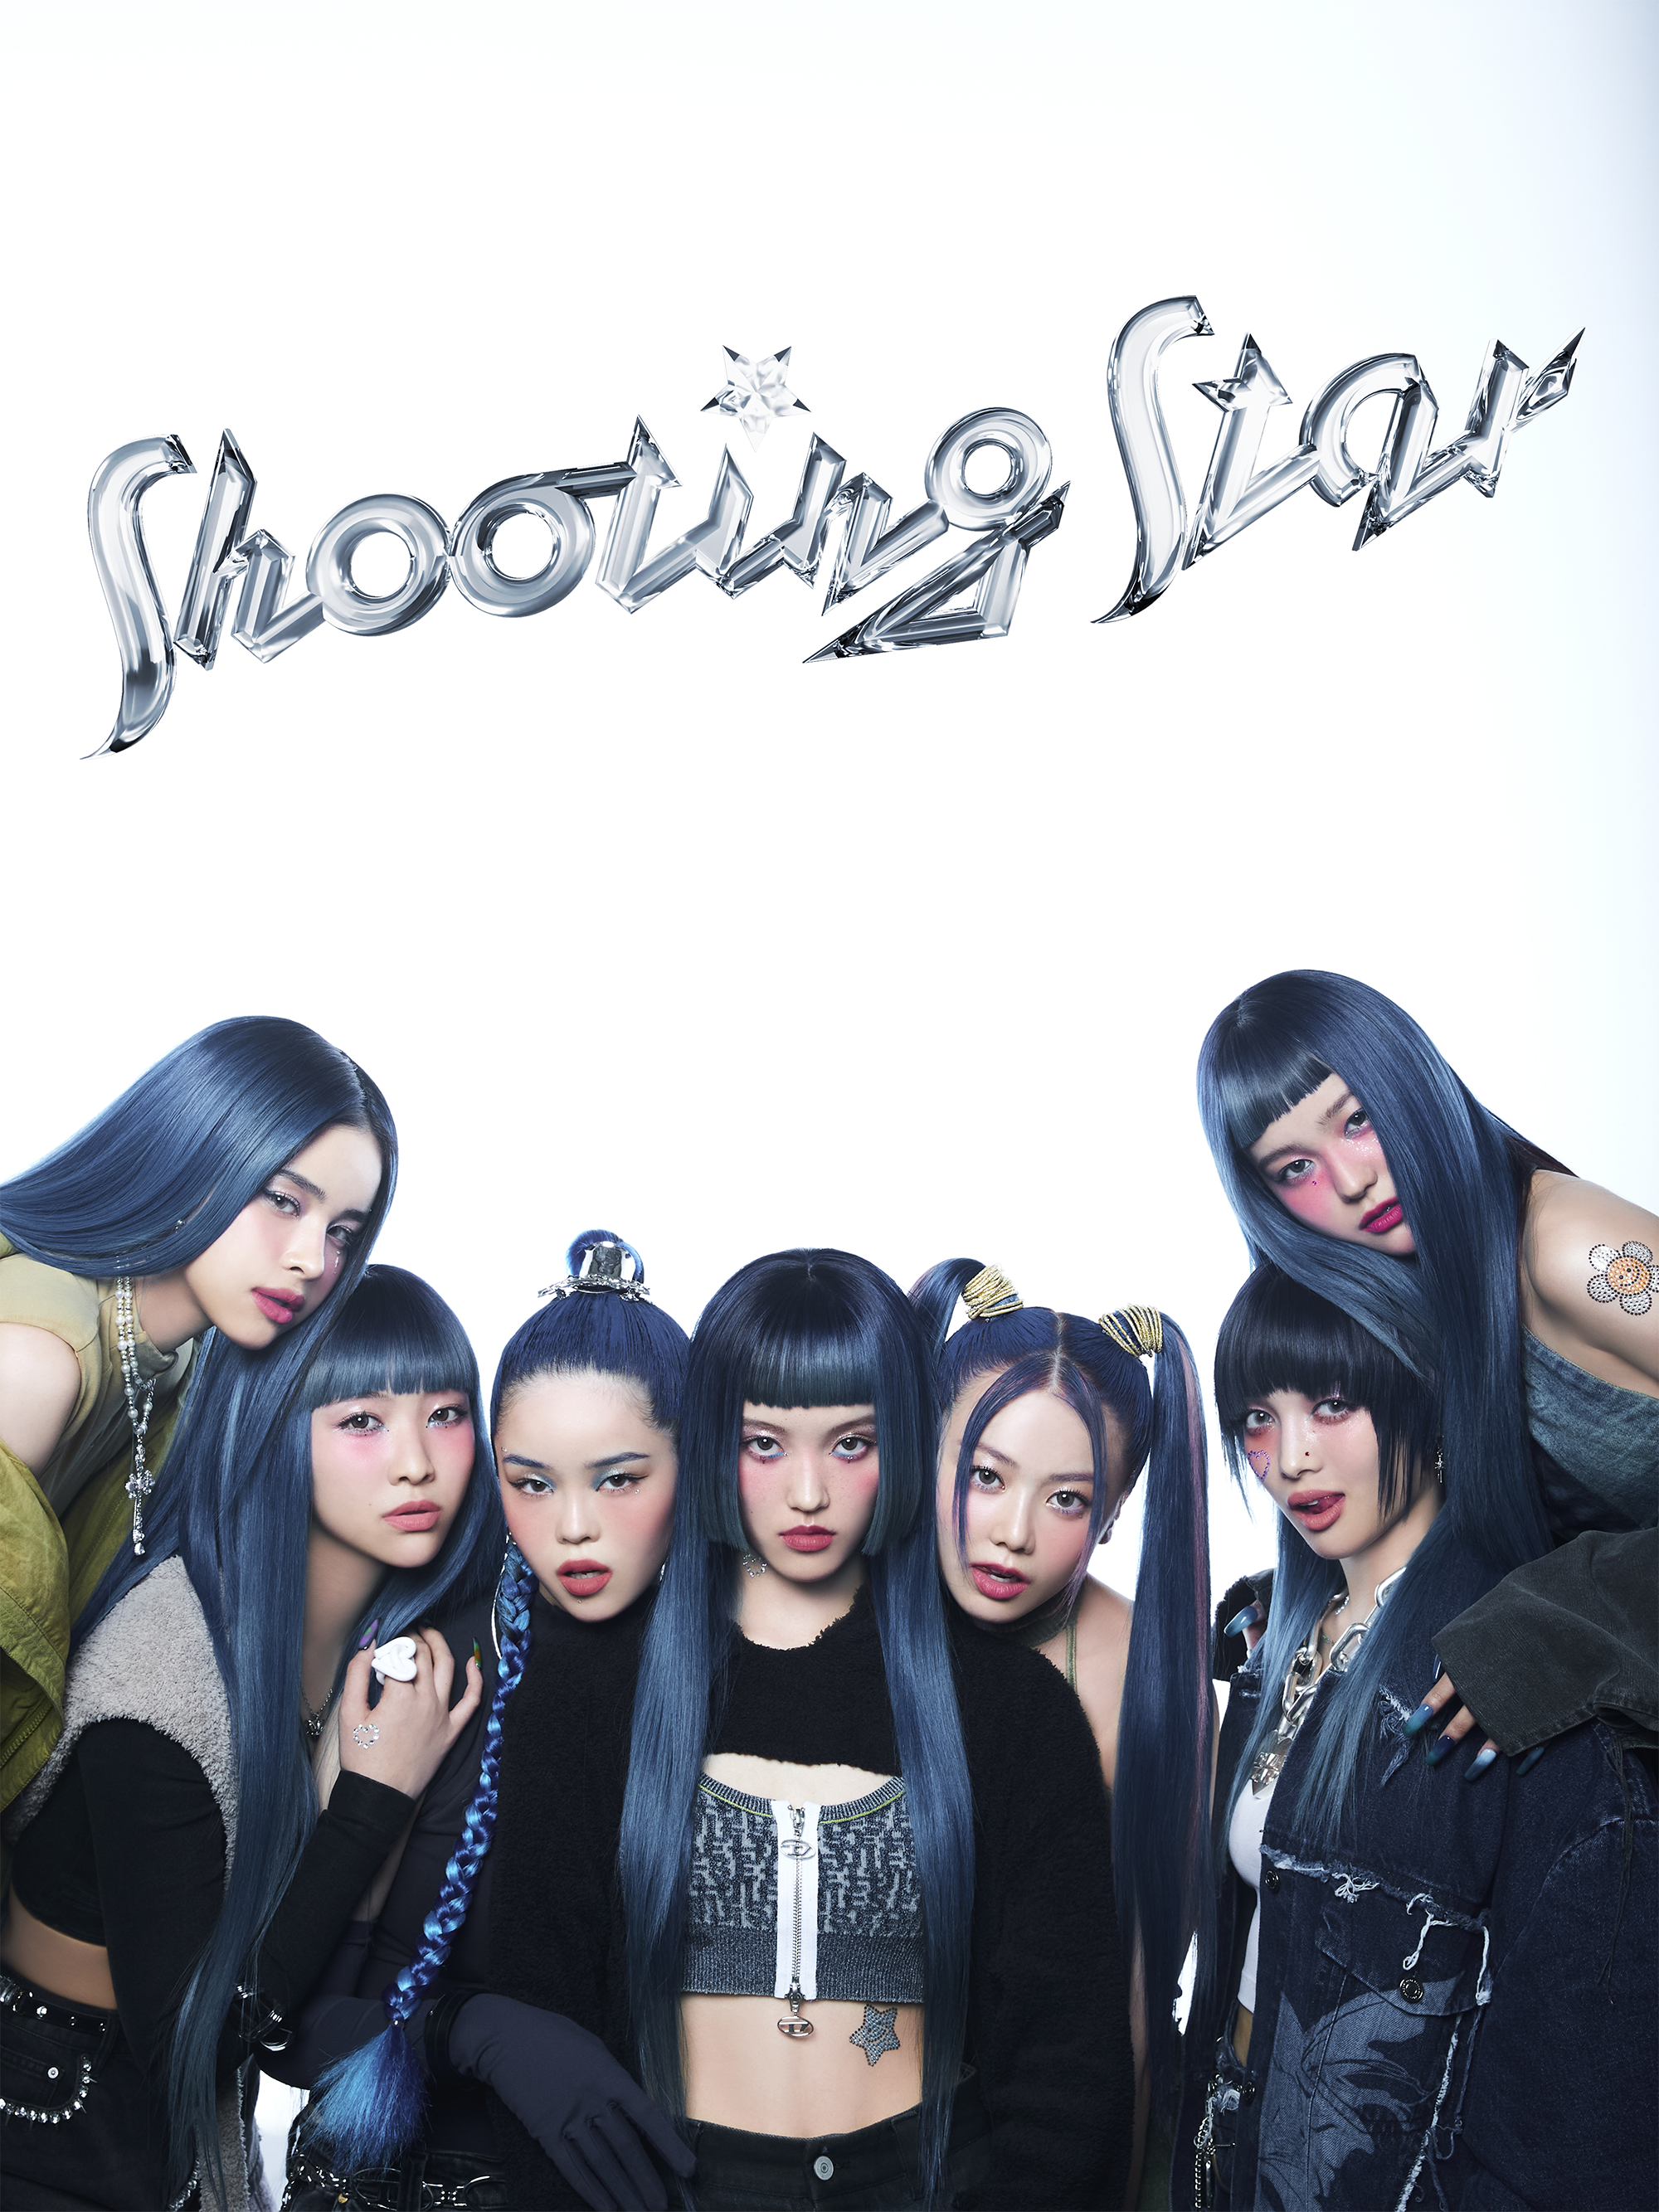 XG's 3rd Single 'SHOOTING STAR' is Available on 2023.01.25 Wed